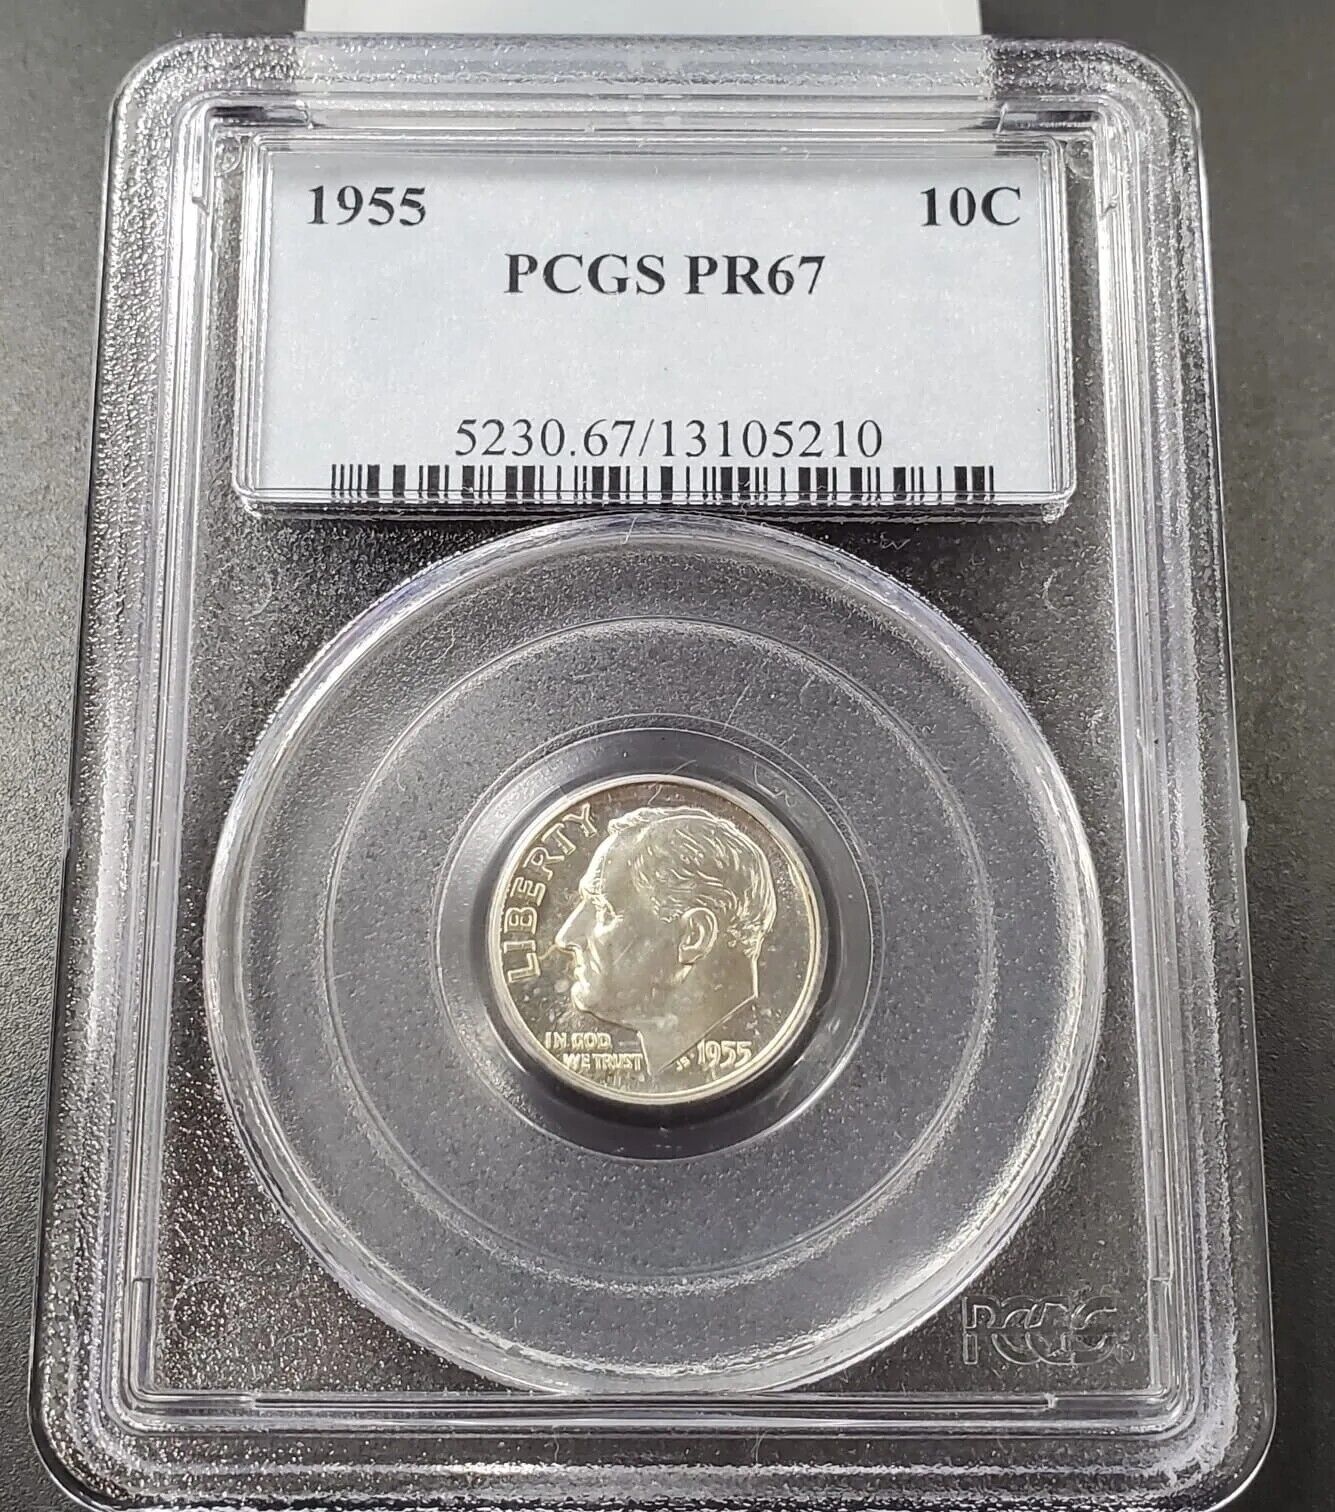 1955 P Roosevelt 10c Silver Dime Coin PCGS PF67 Gem Proof Certified